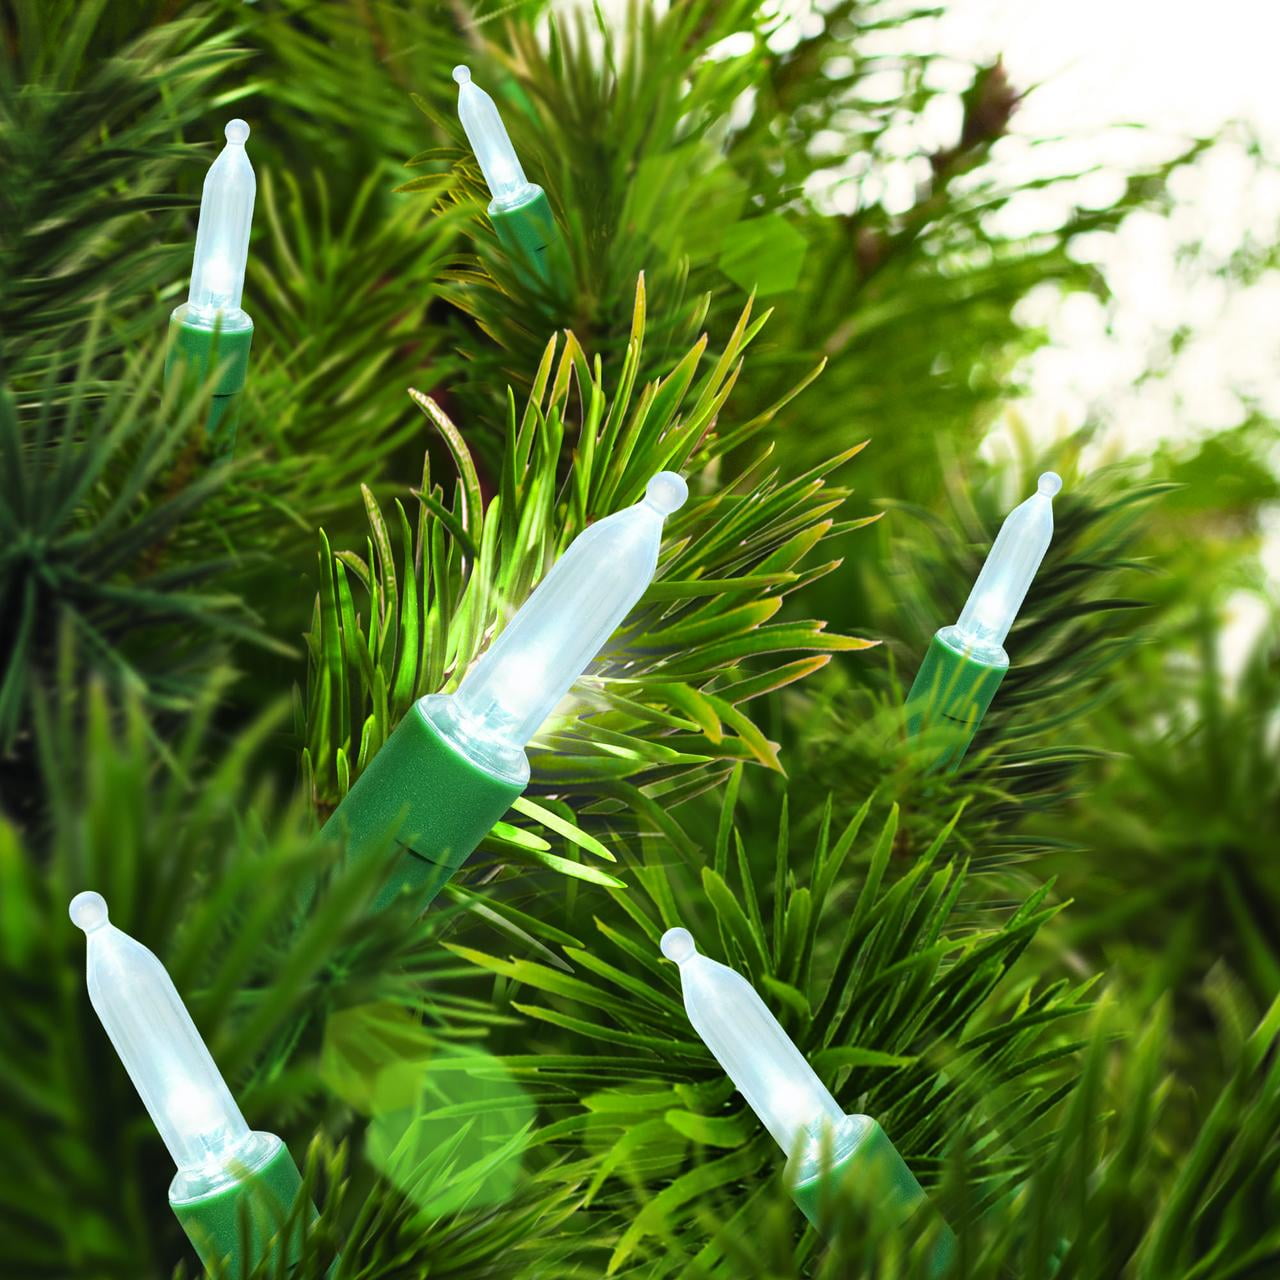 USB Christmas tree lights - 300 LED wires, cold white, CATEGORIES \  Christmas offer 2023